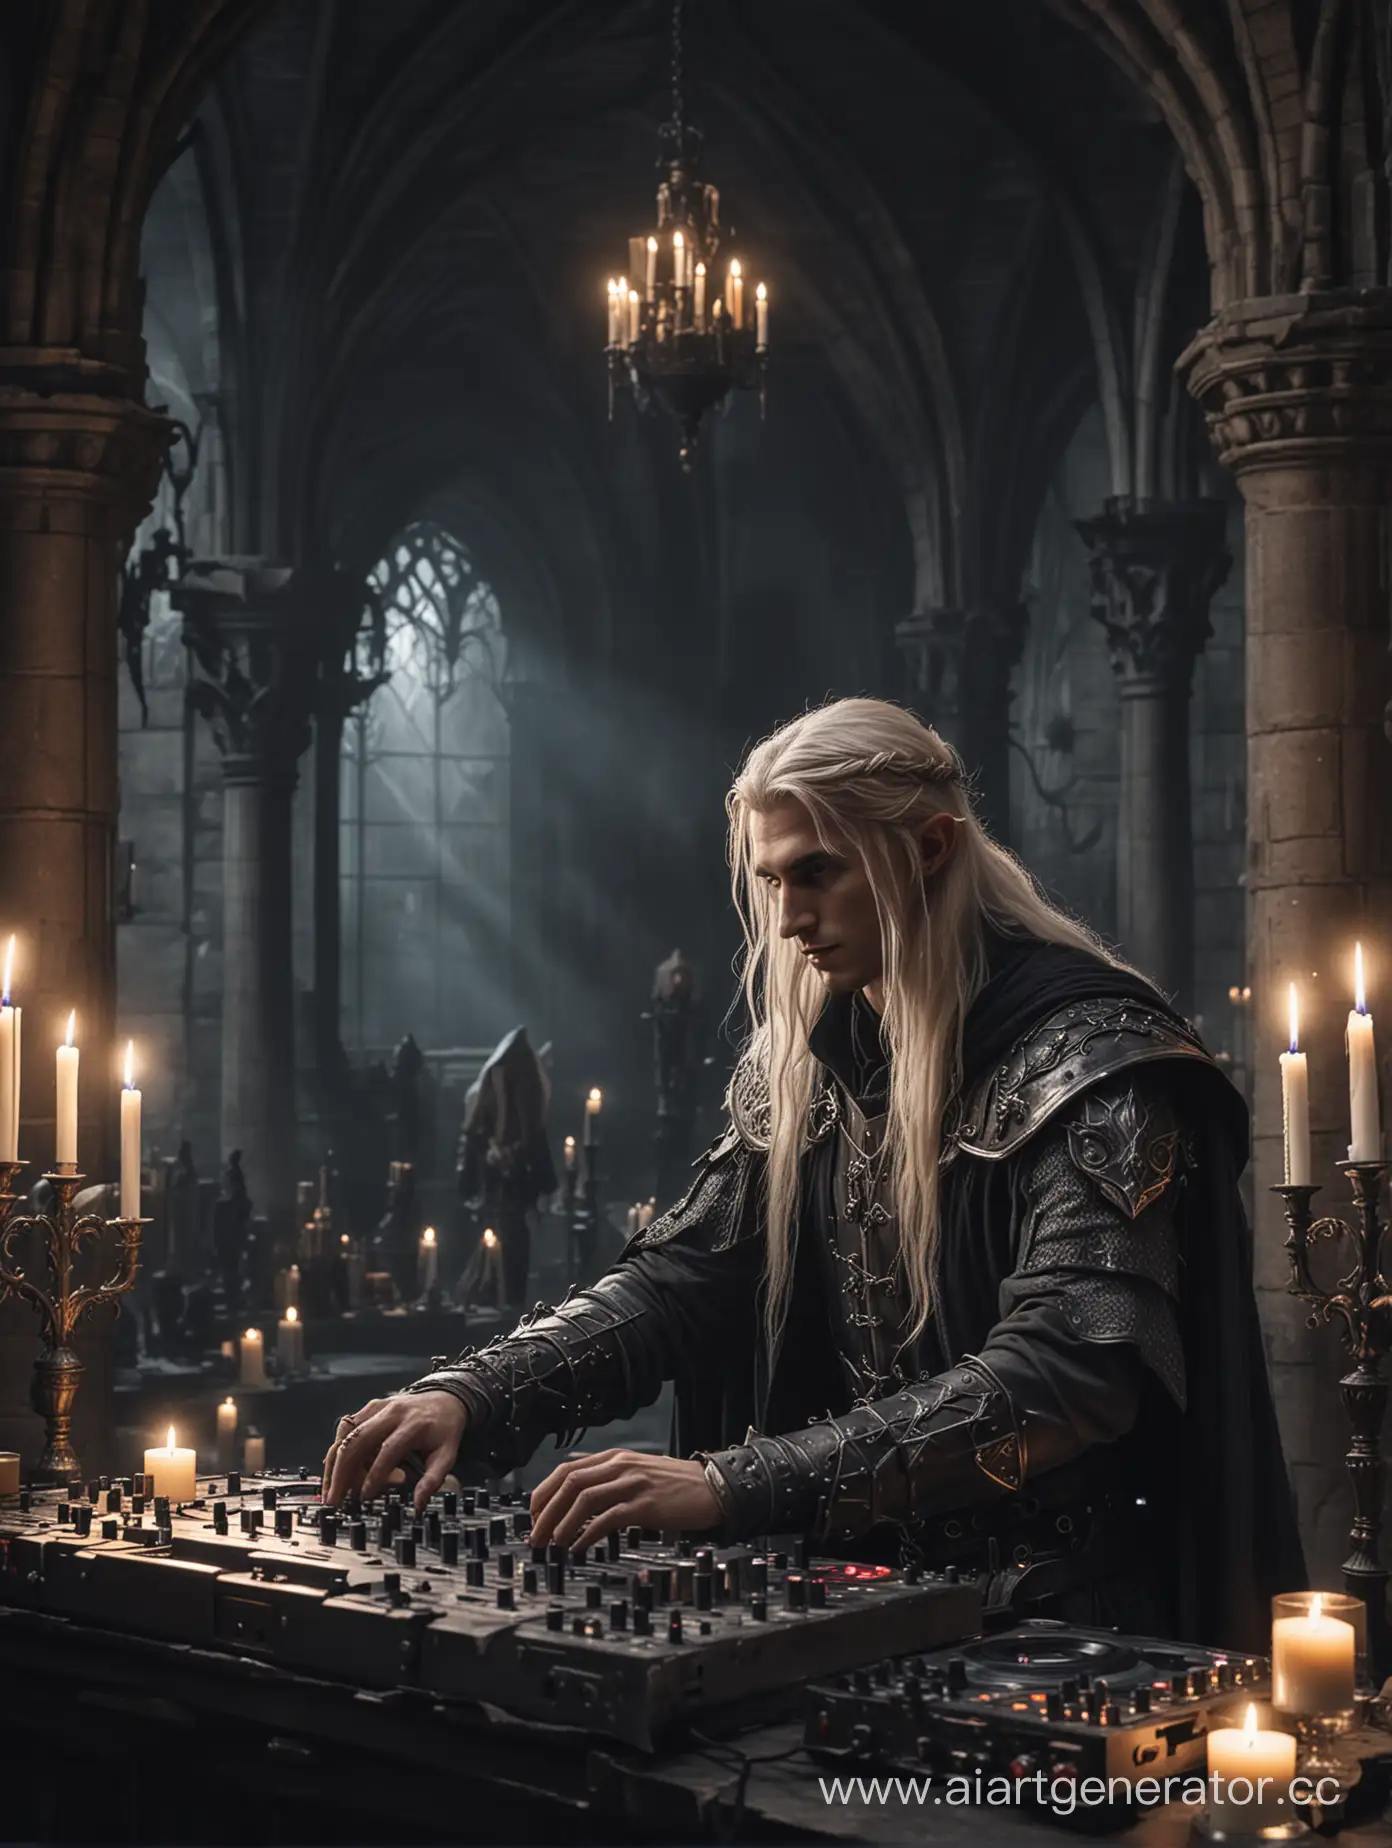 Elf-Knight-DJ-Performing-in-a-Gothic-Castle-at-Night